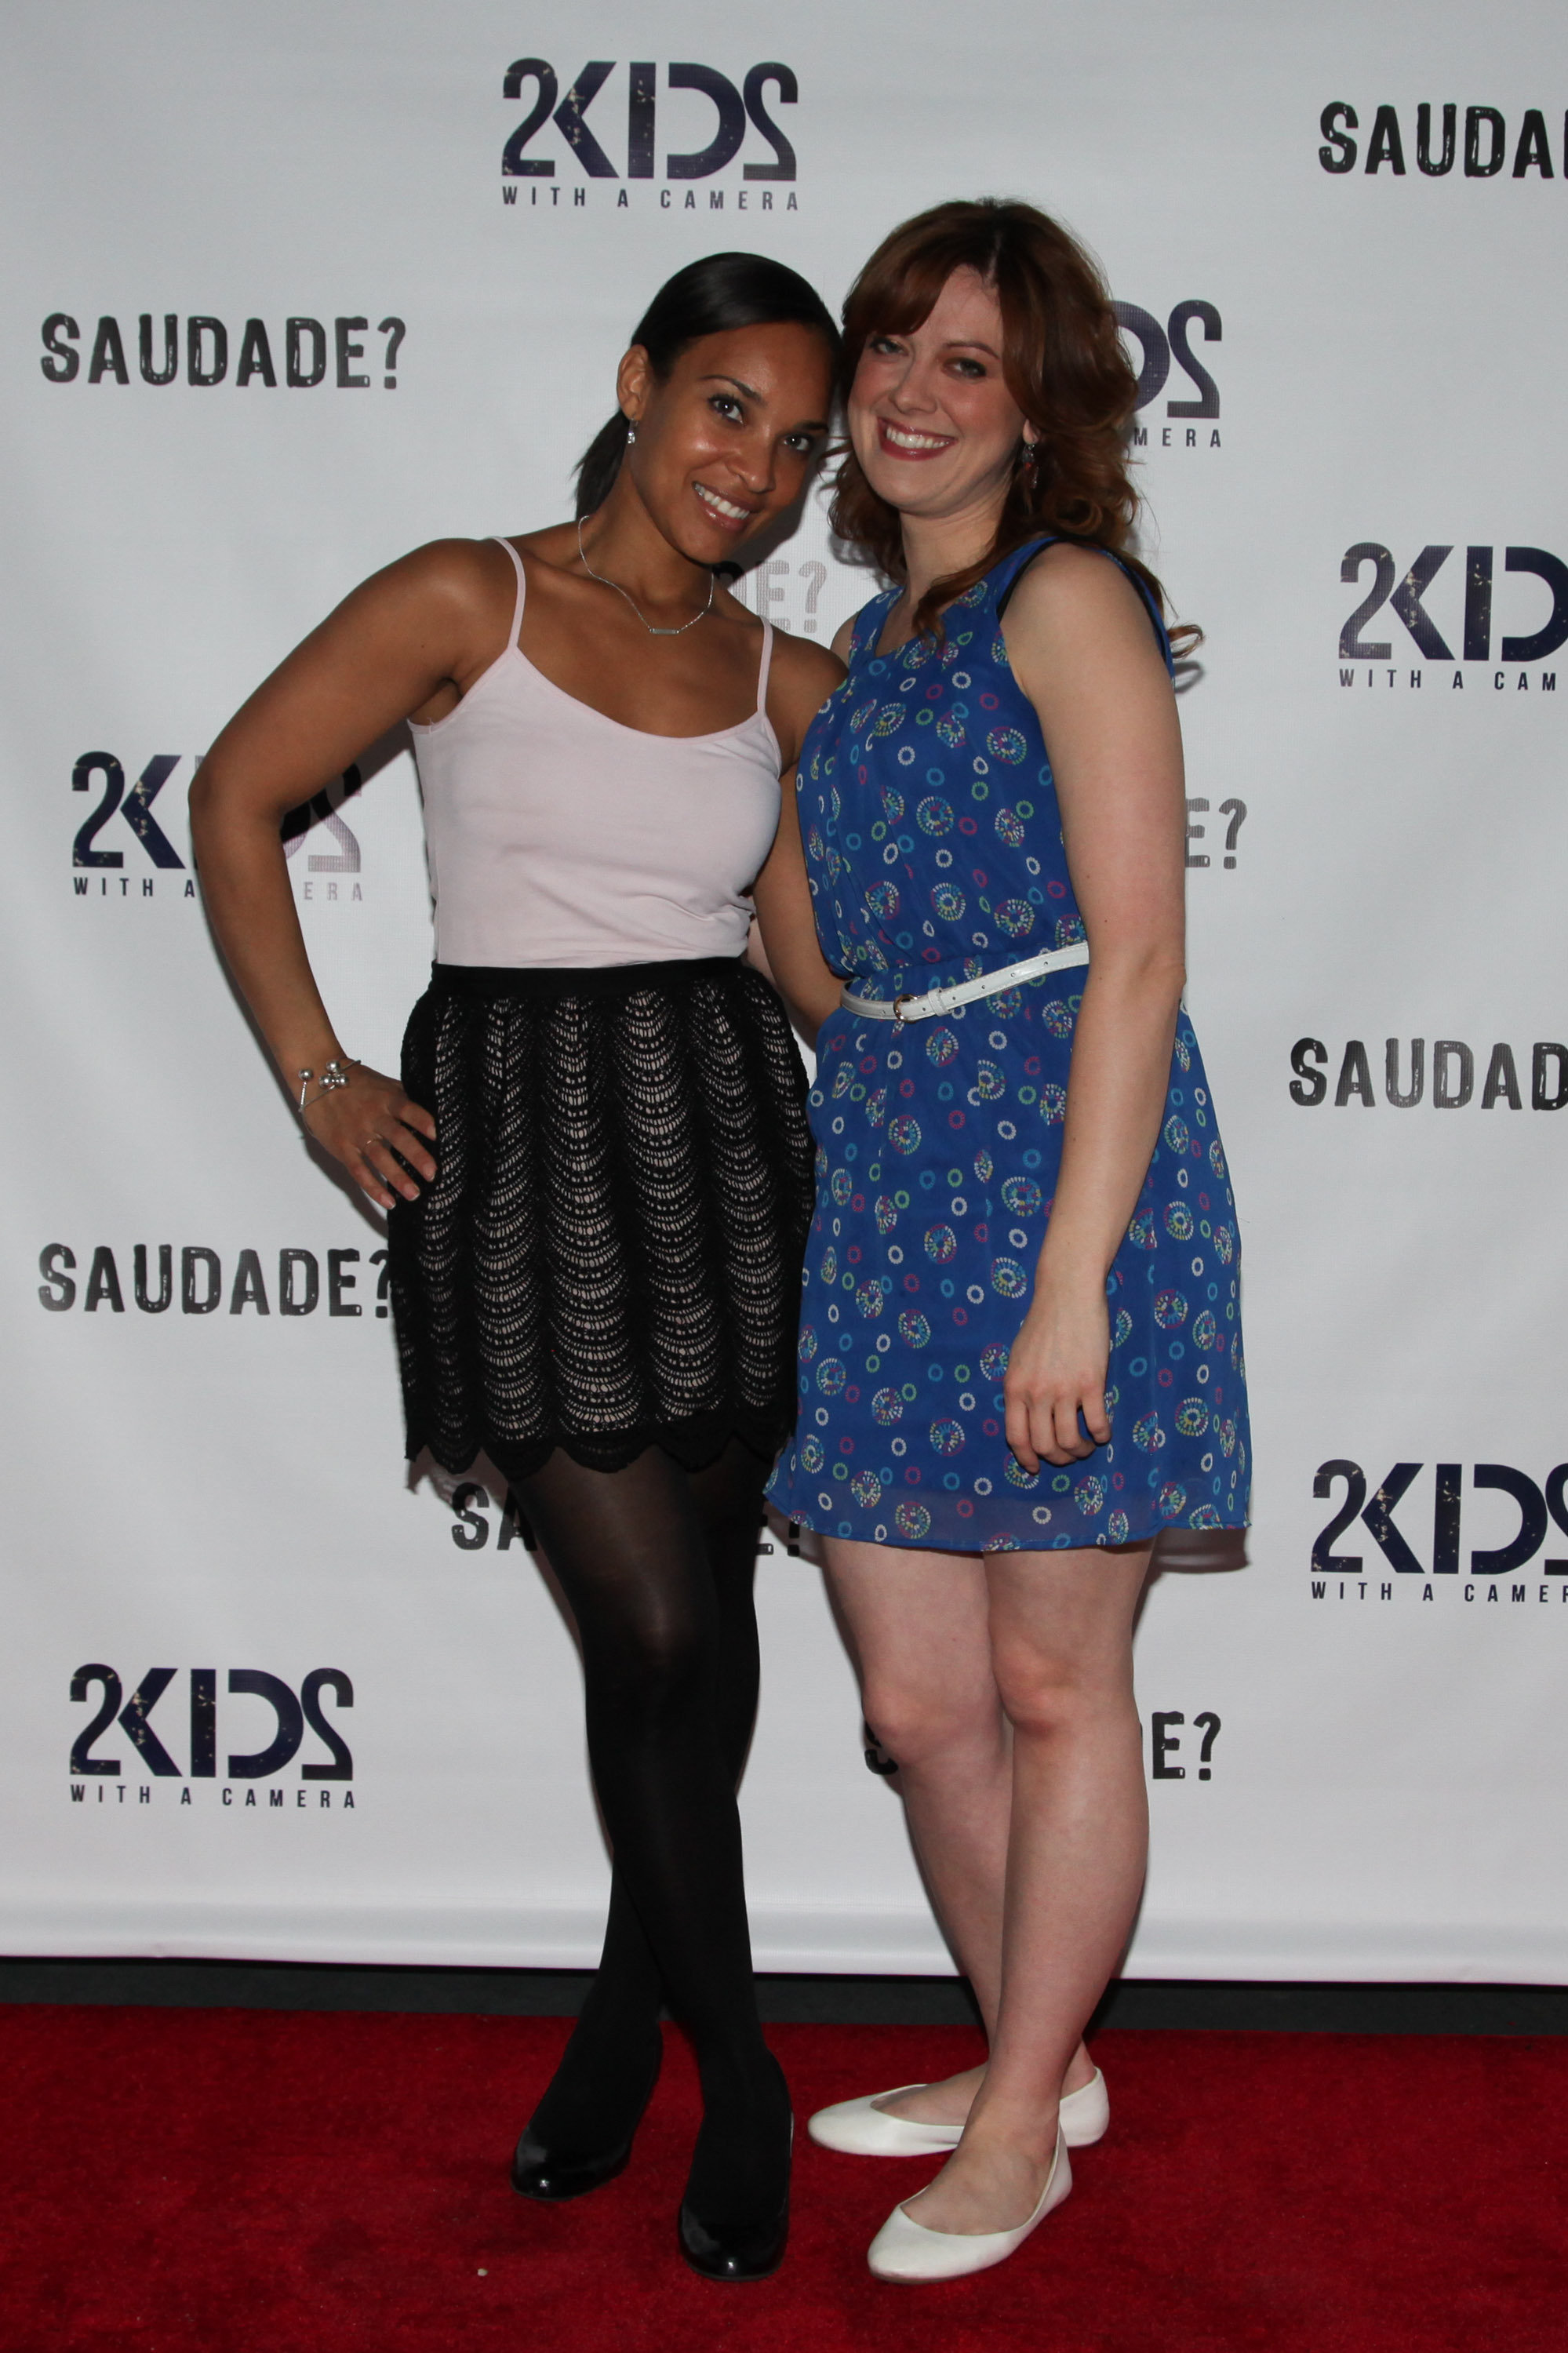 Nia Fairweather and Karis Danish at the premiere of 